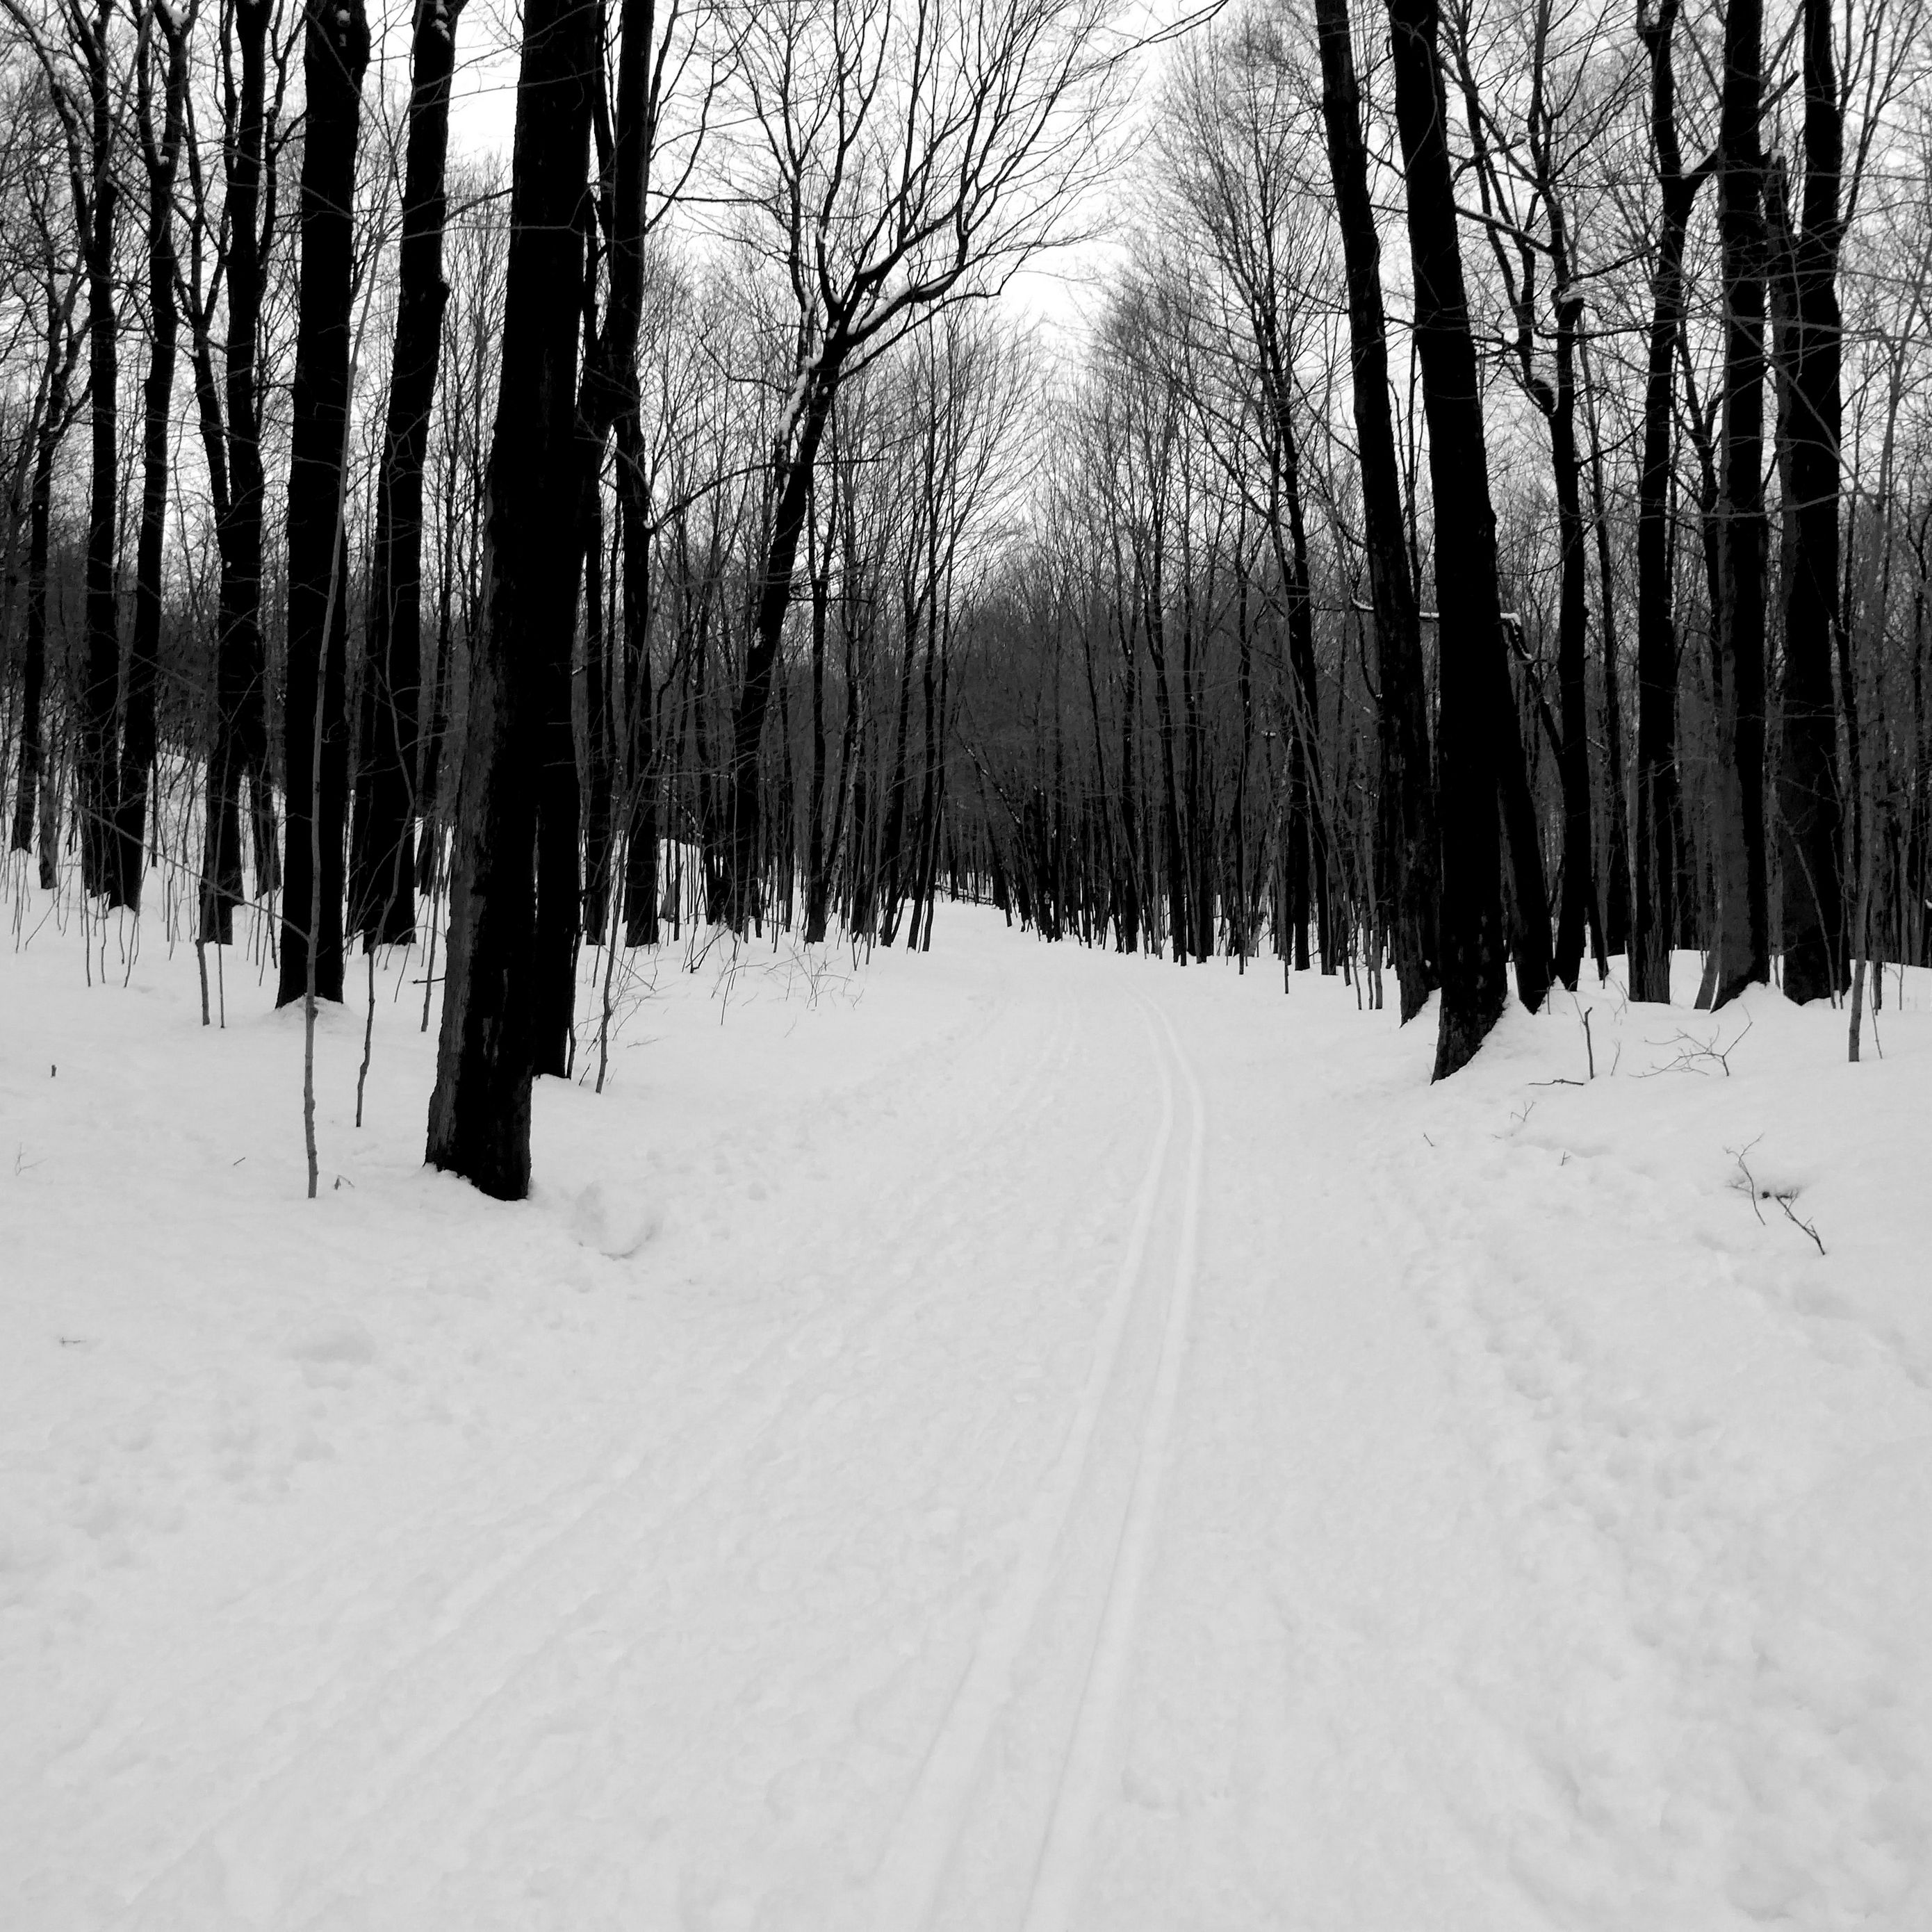 Download wallpaper 2780x2780 forest, road, bw, winter ipad air, ipad air ipad ipad ipad mini ipad mini ipad mini ipad pro 9.7 for parallax HD background